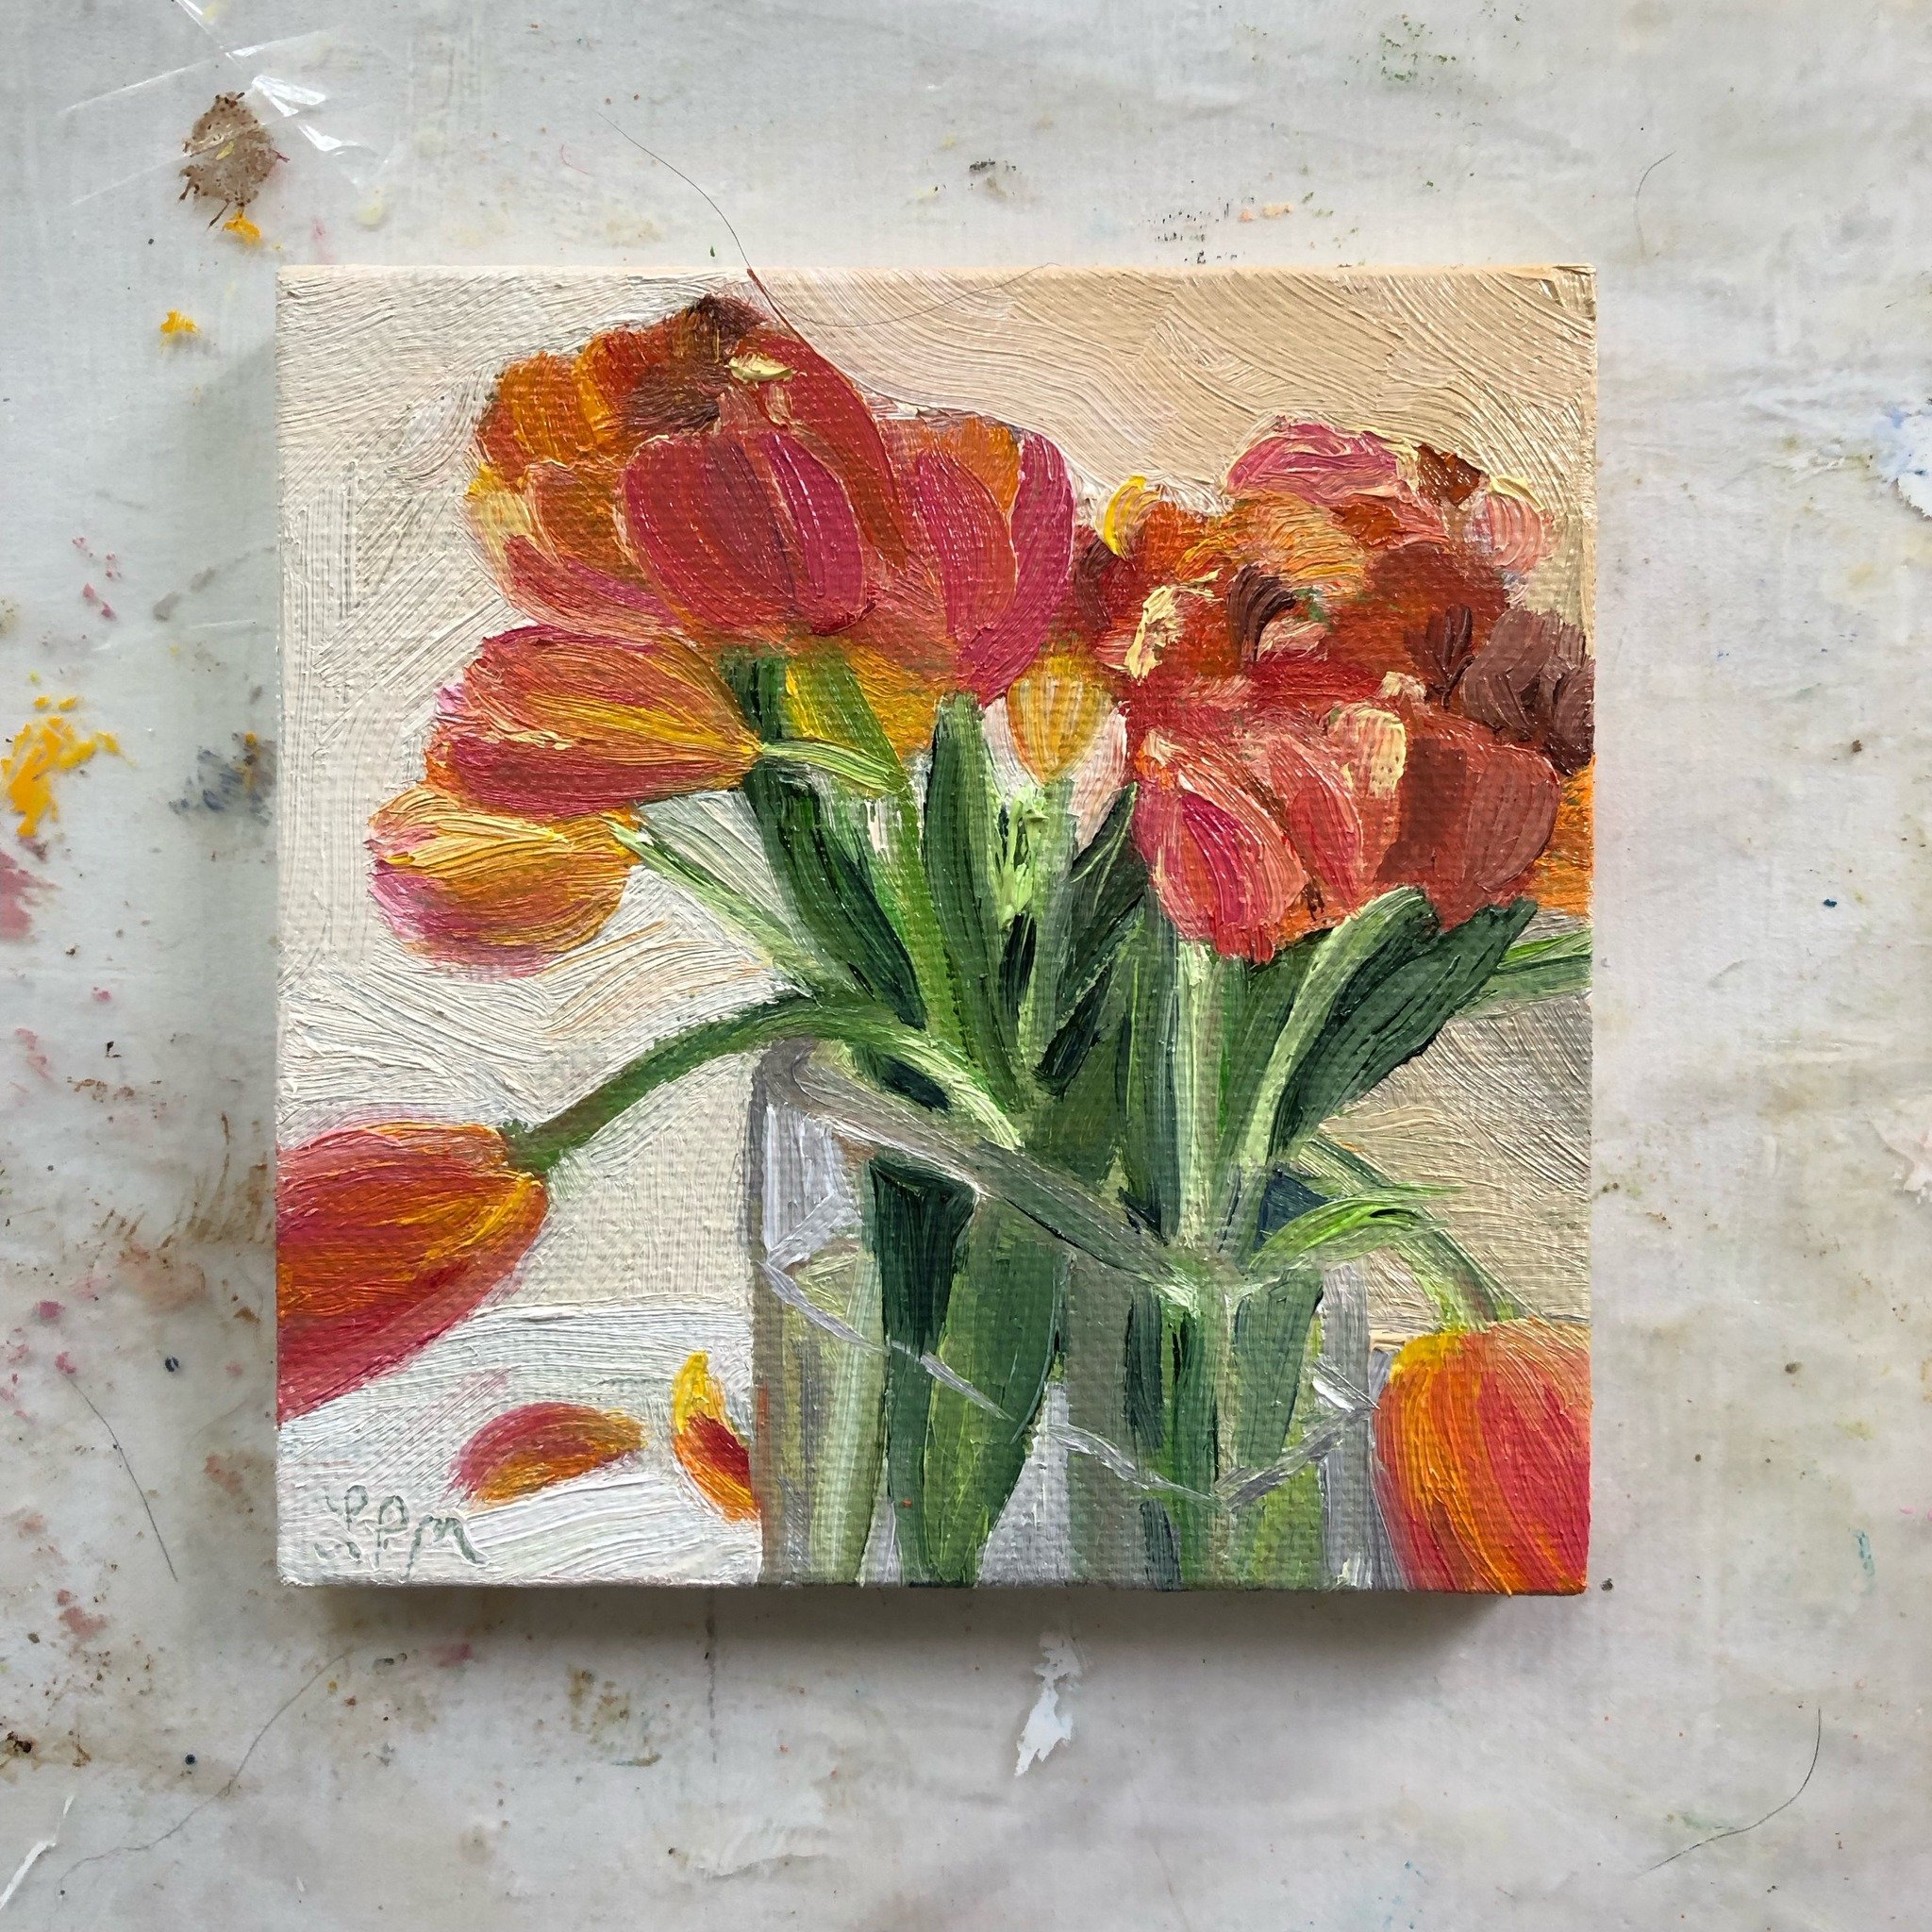 Little 4x4&quot; study to decide if I want to paint it bigger (and to use up the tiny canvases that have been sitting around my office for quite a while). I think I'm firmly a maybe.

#oilpainting  #alexandriaartist #tulips #tulippainting #blossoms #